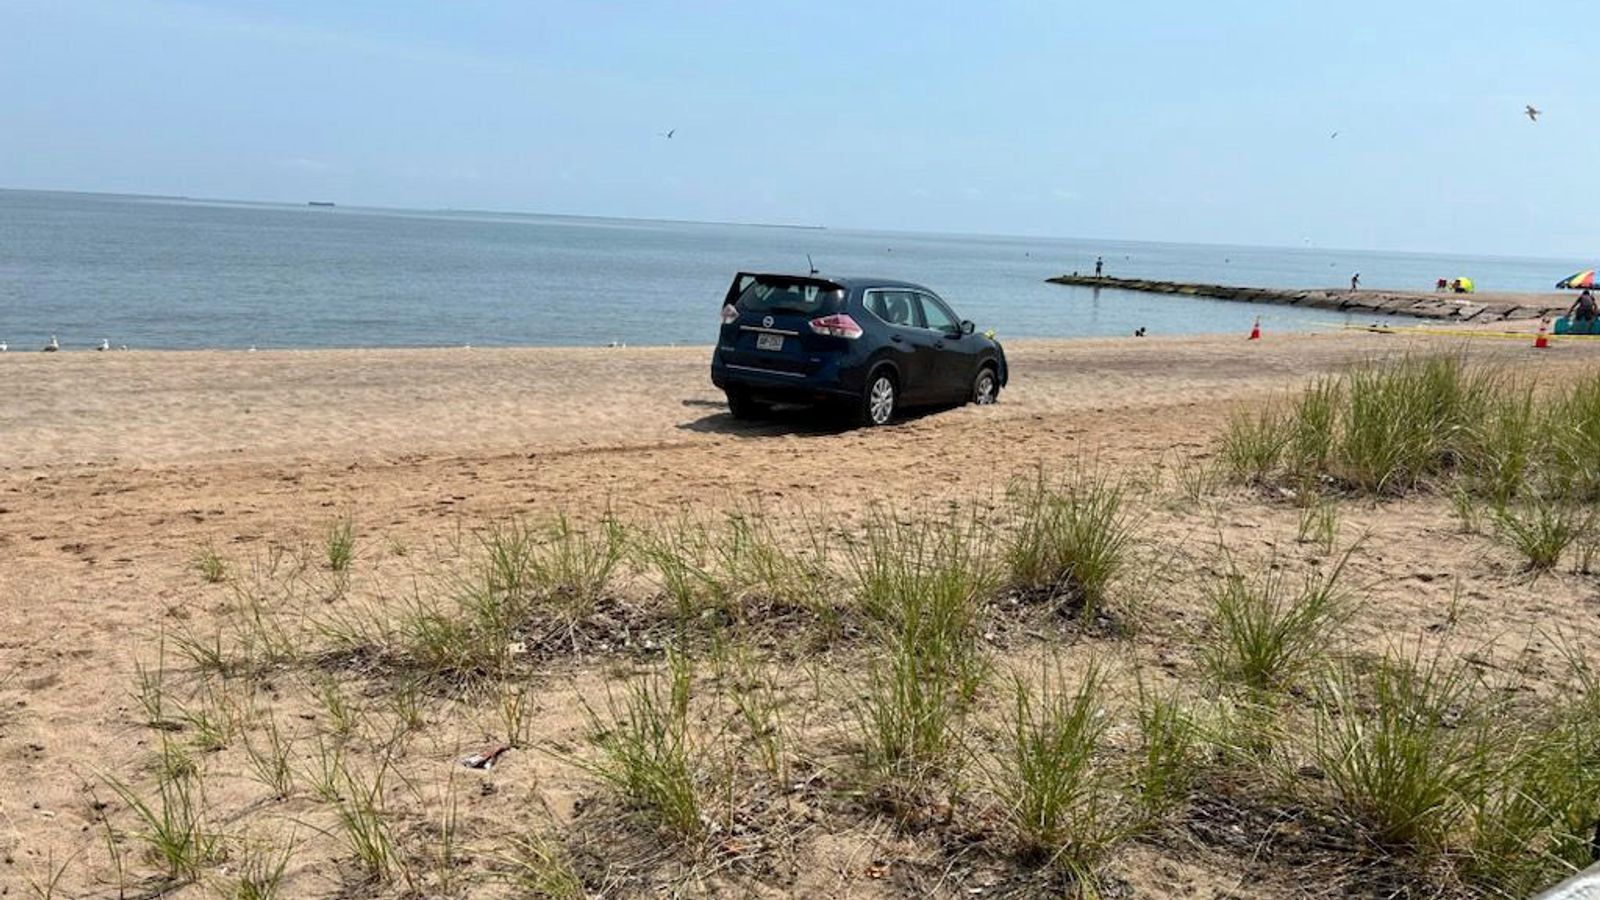 Father ‘trying to drown children’ at Connecticut beach detained by police